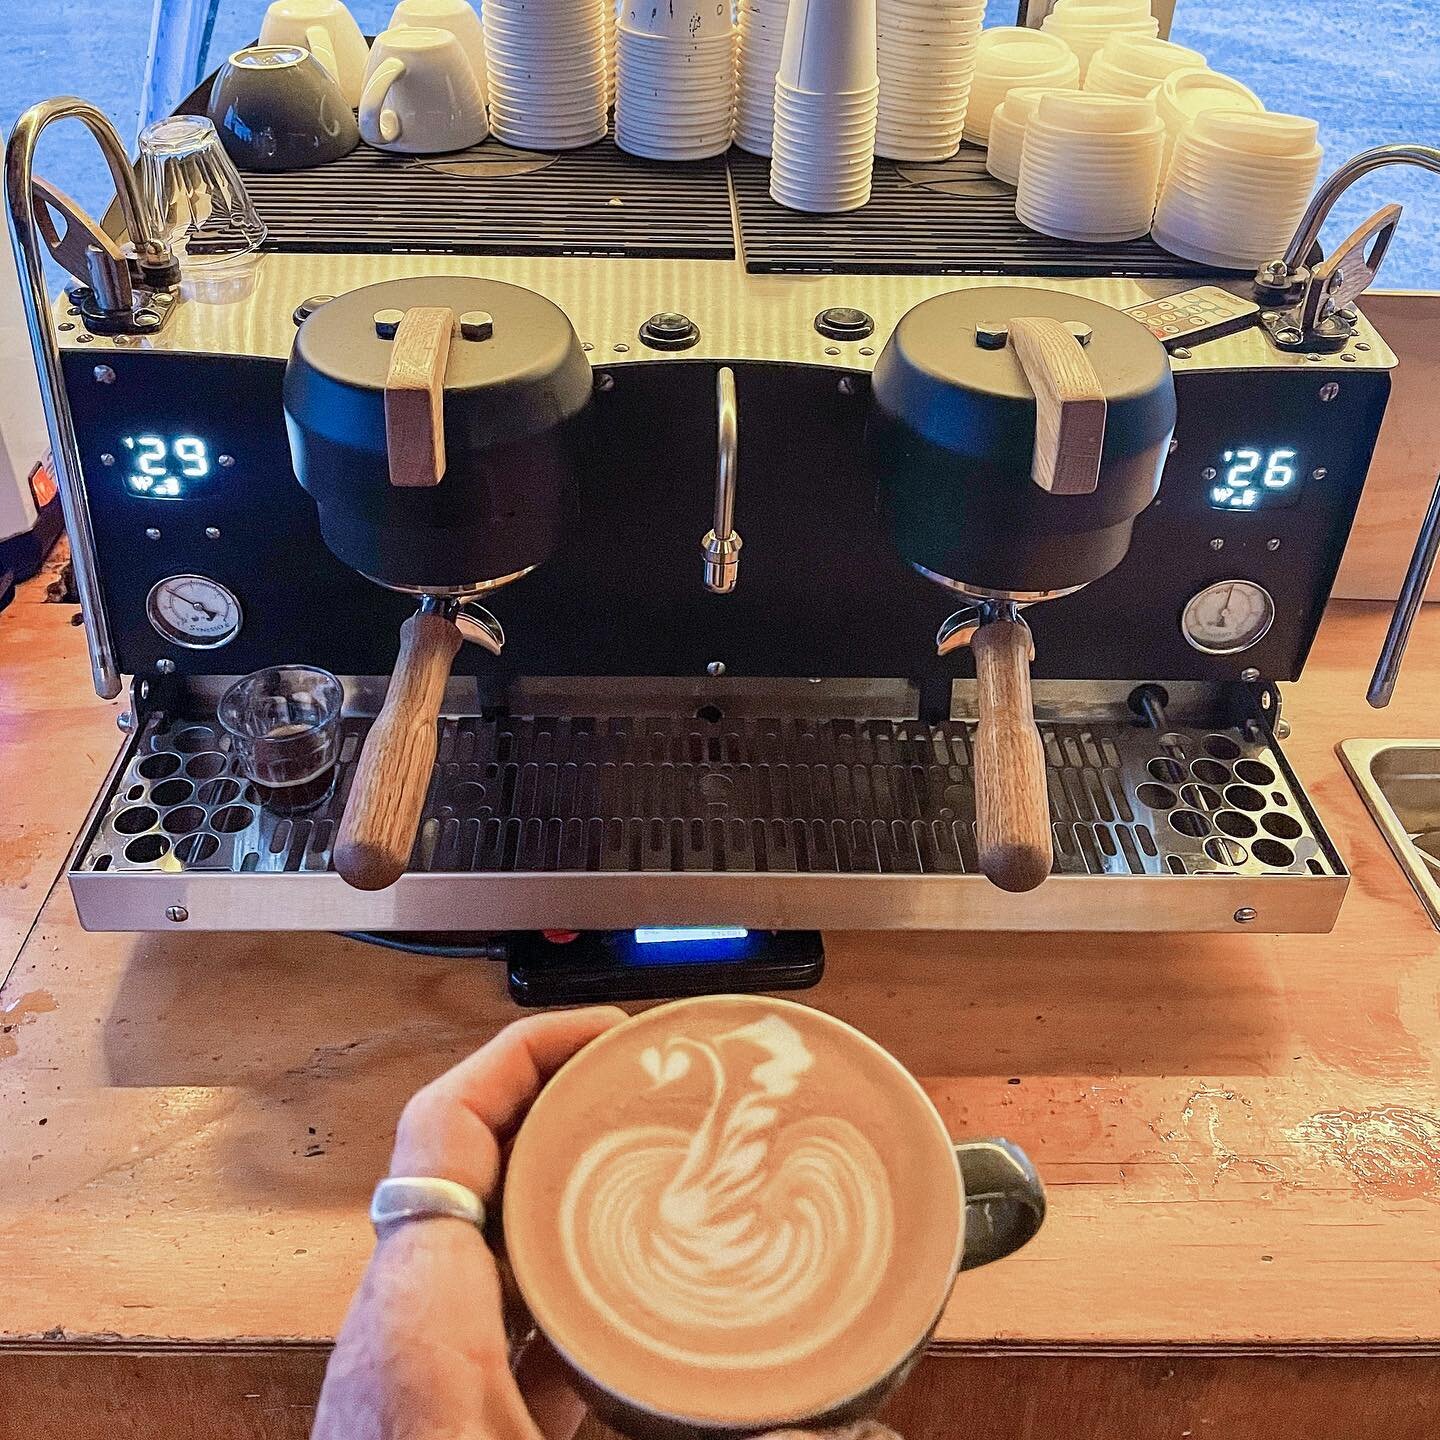 Your equipment is only as good as the barista behind it. But it definitely helps having one of the best machines going around 😍
We love our #synessos200 
&bull;
&bull;
&bull;
&bull;
#bussymcbusfacecoffee #synessos200 #specialtycoffee #coffeeaddict #